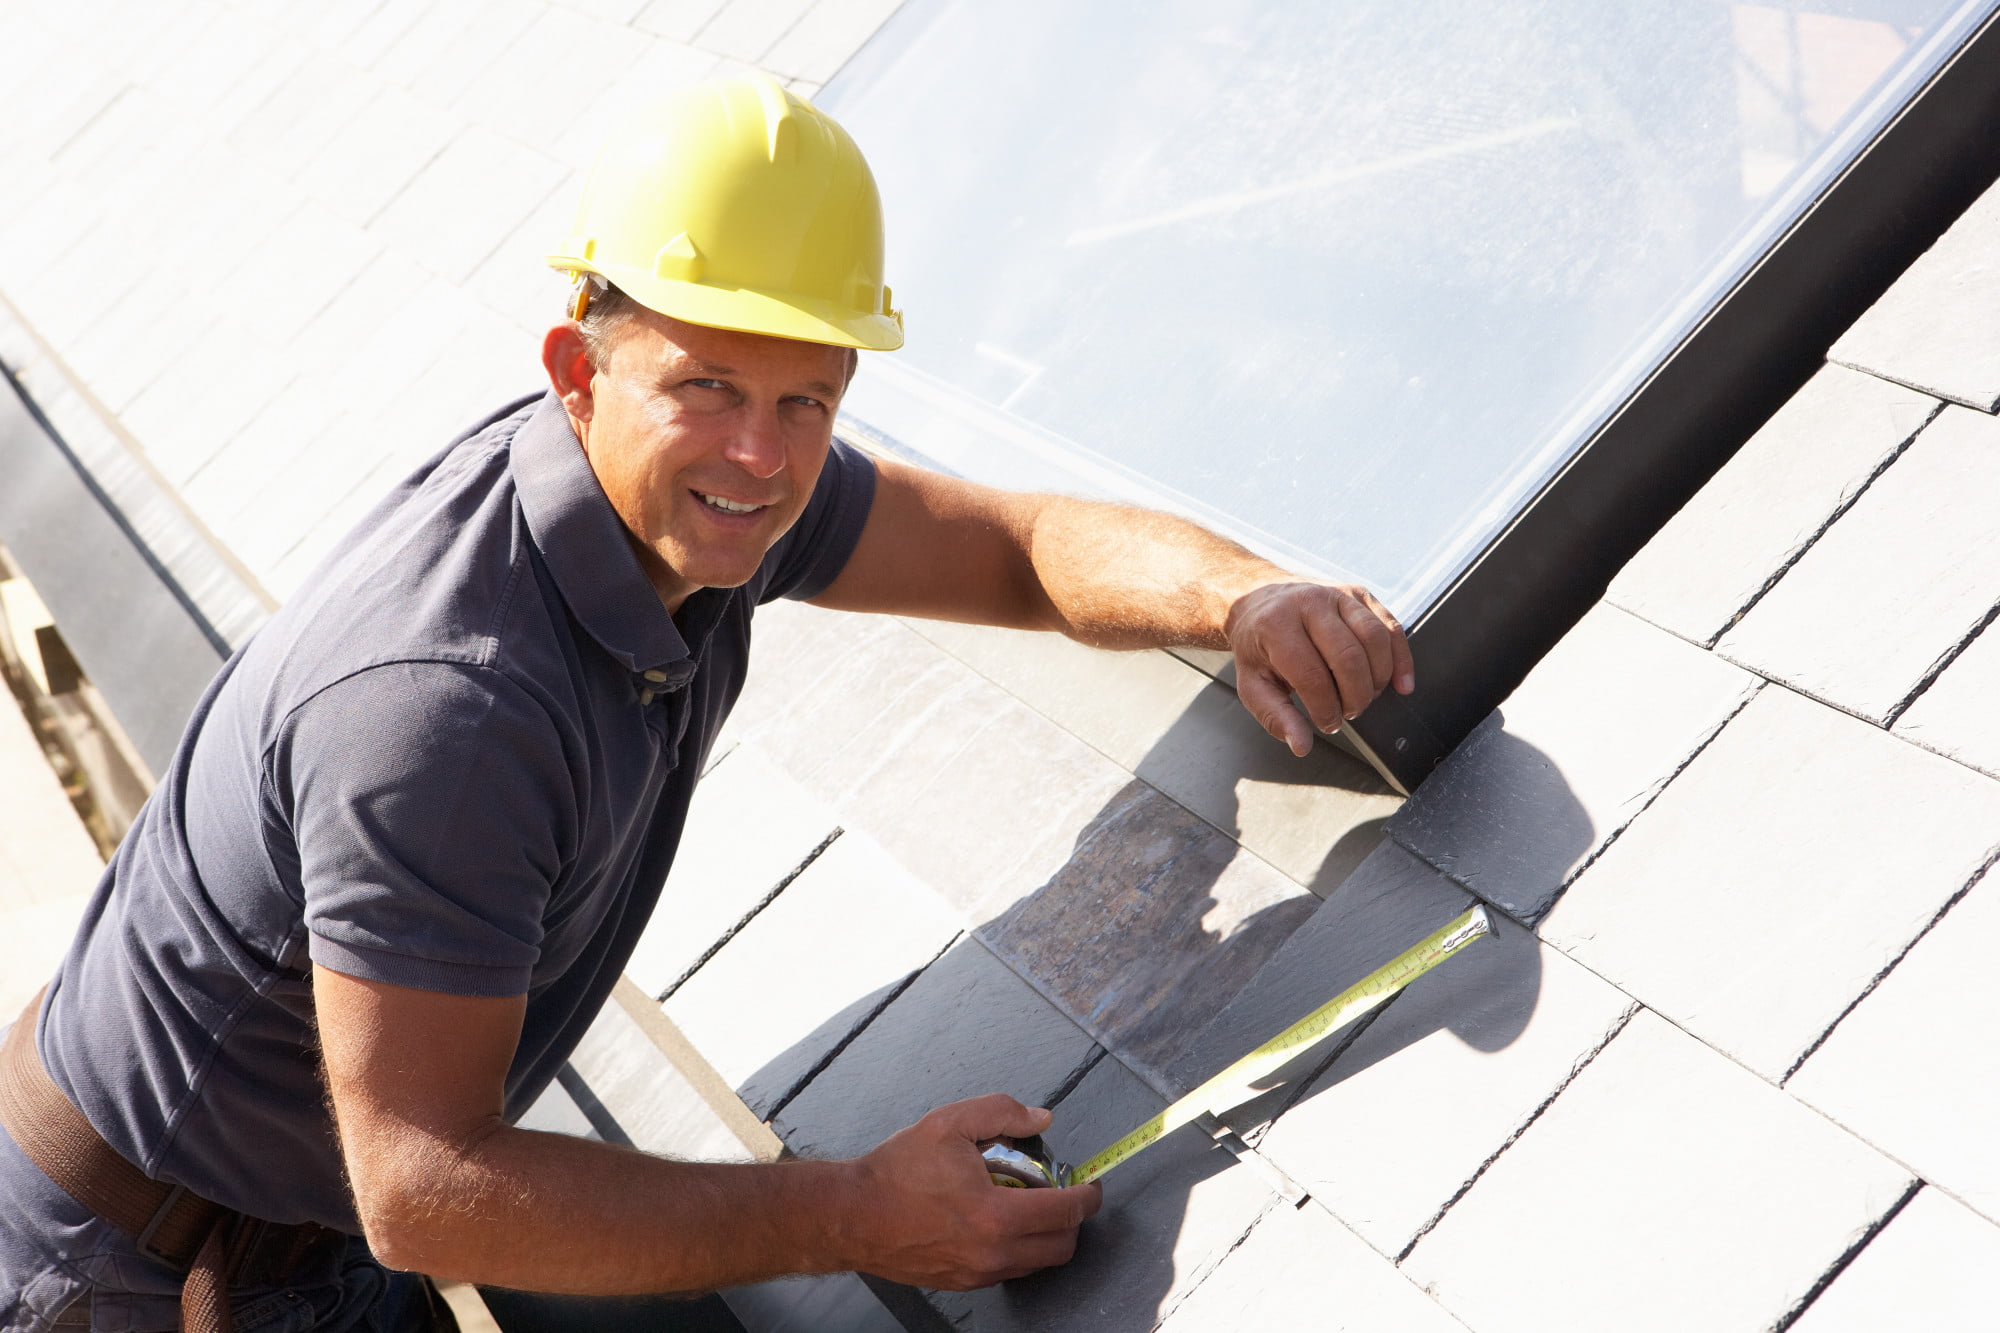 Roofer contractor near me: Do you want to know how to choose the right roofing company? Read on to learn how to make the right choice.